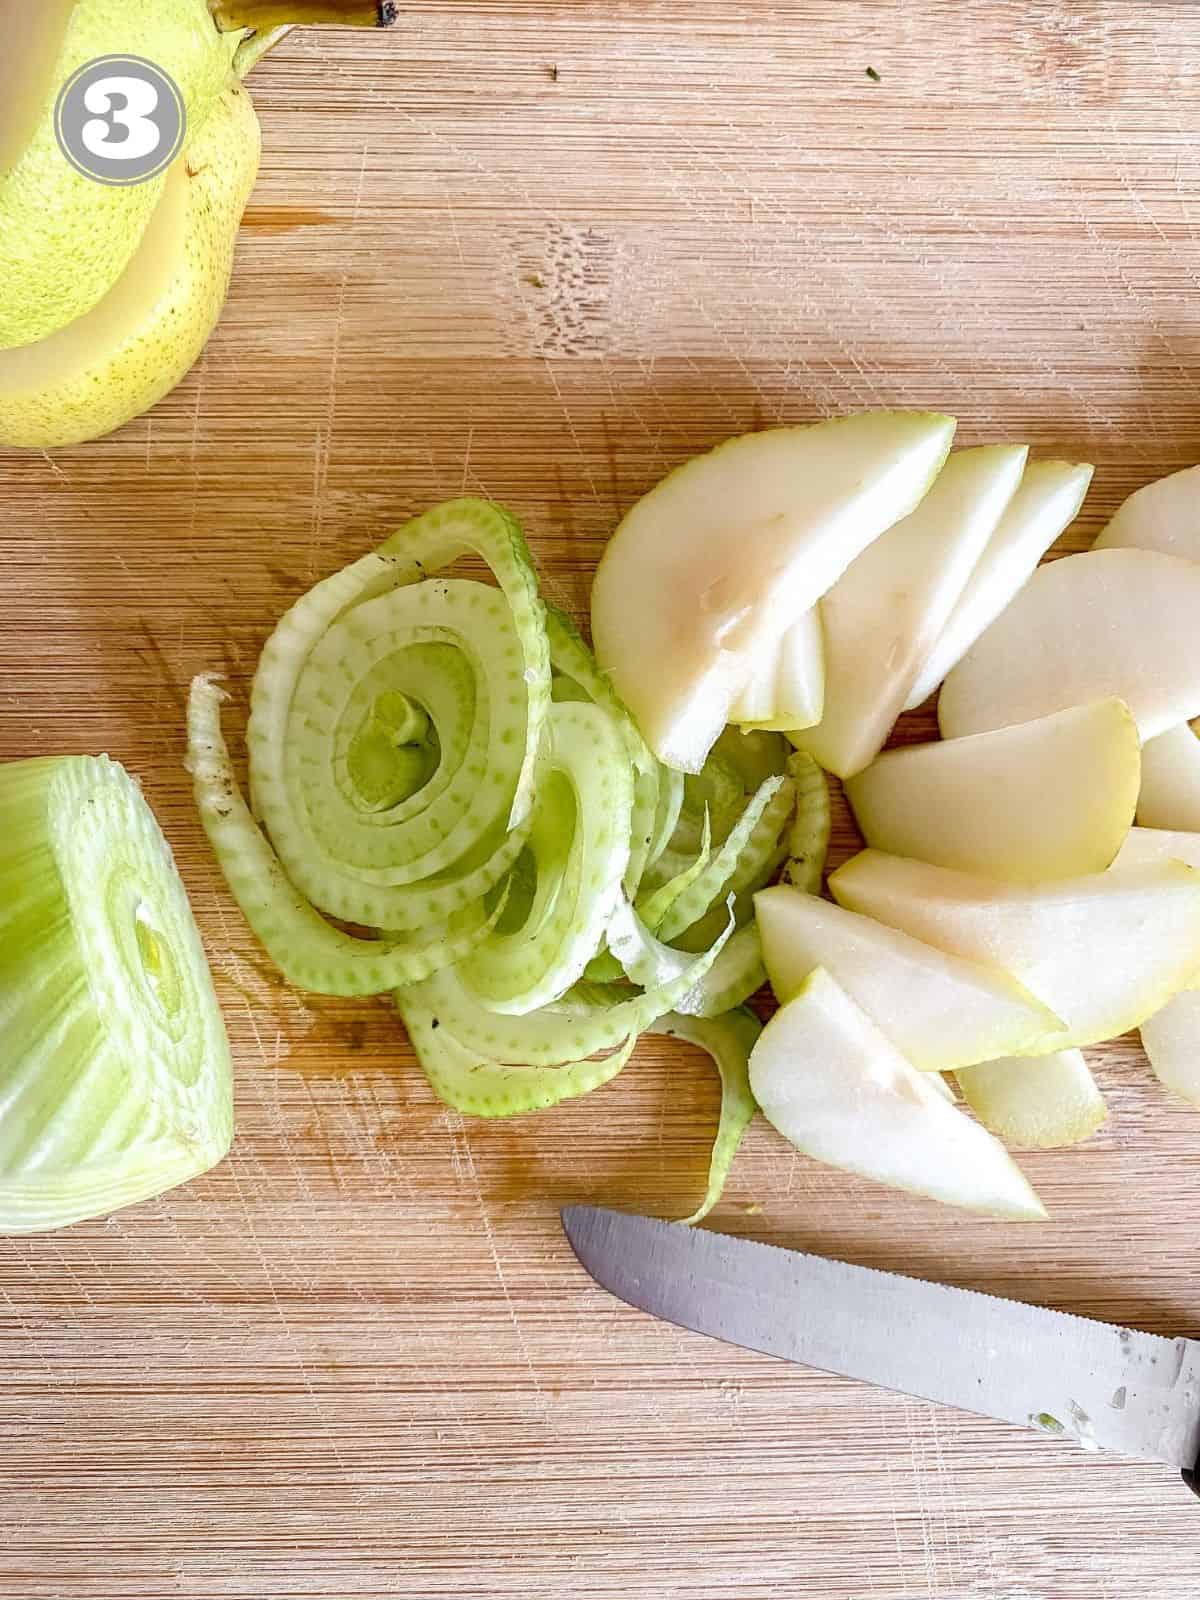 sliced pears and fennel on a wooden board with a knife.